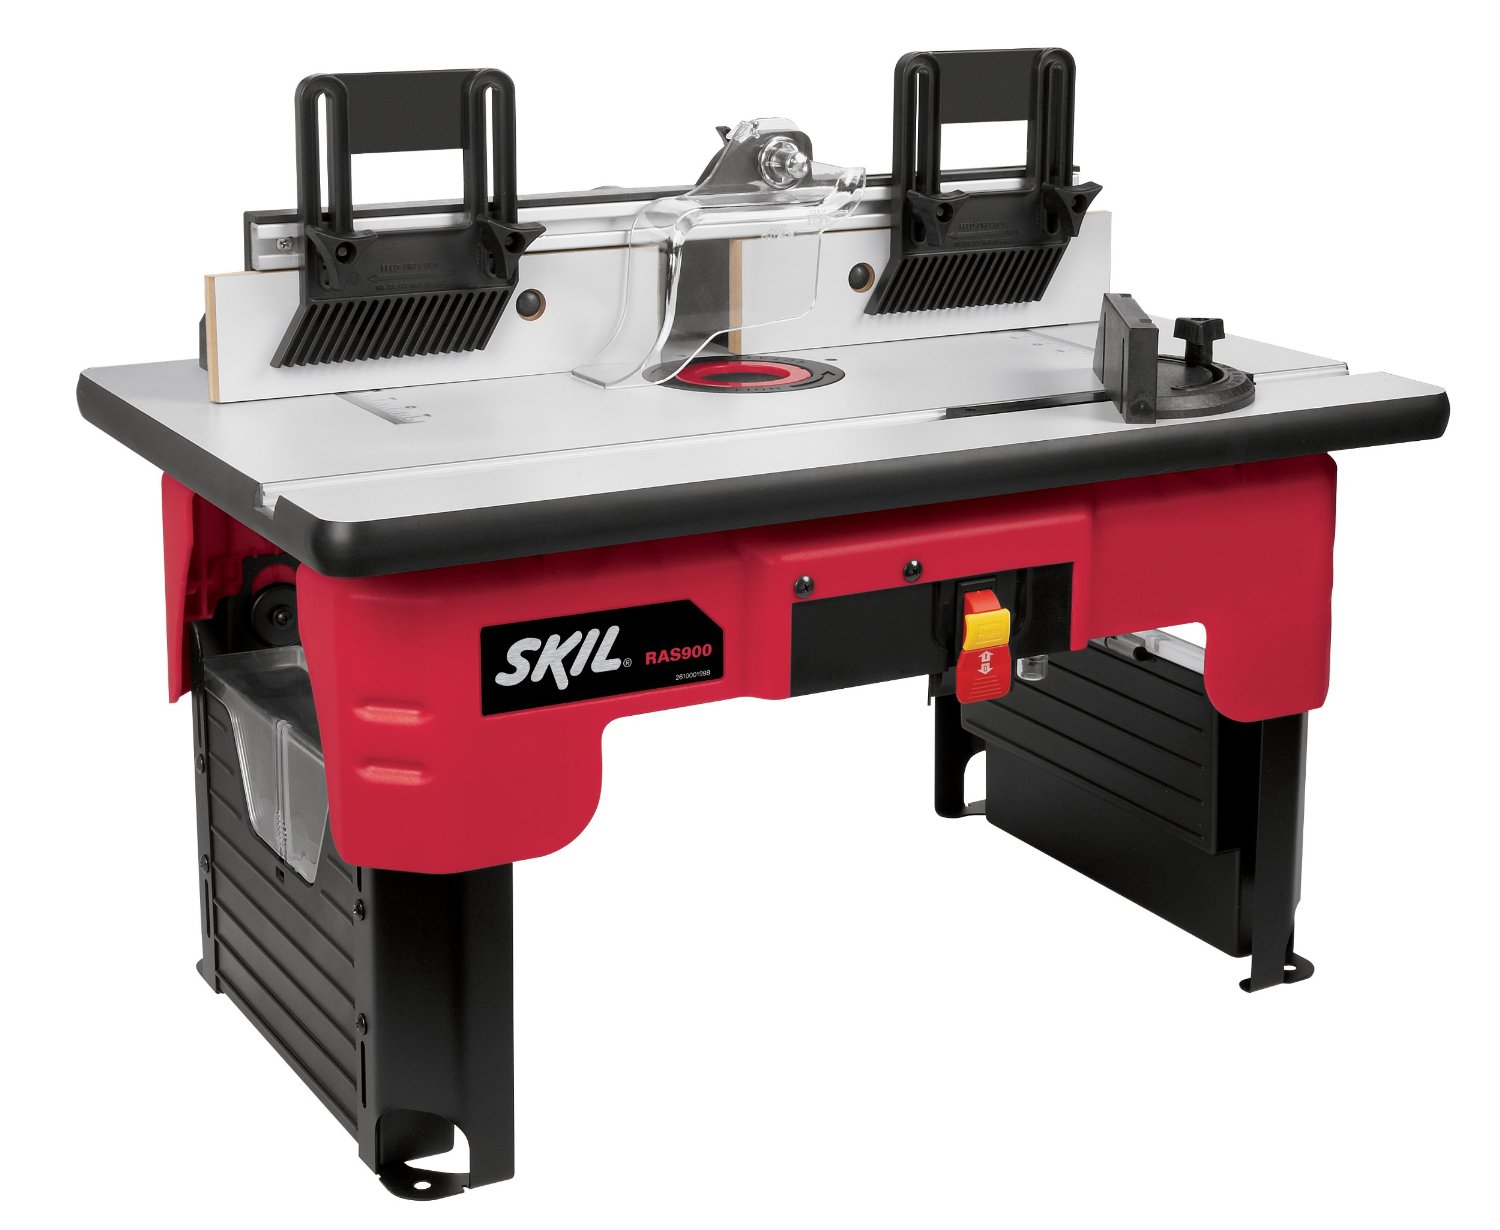 SKIL RAS900 Router Table review